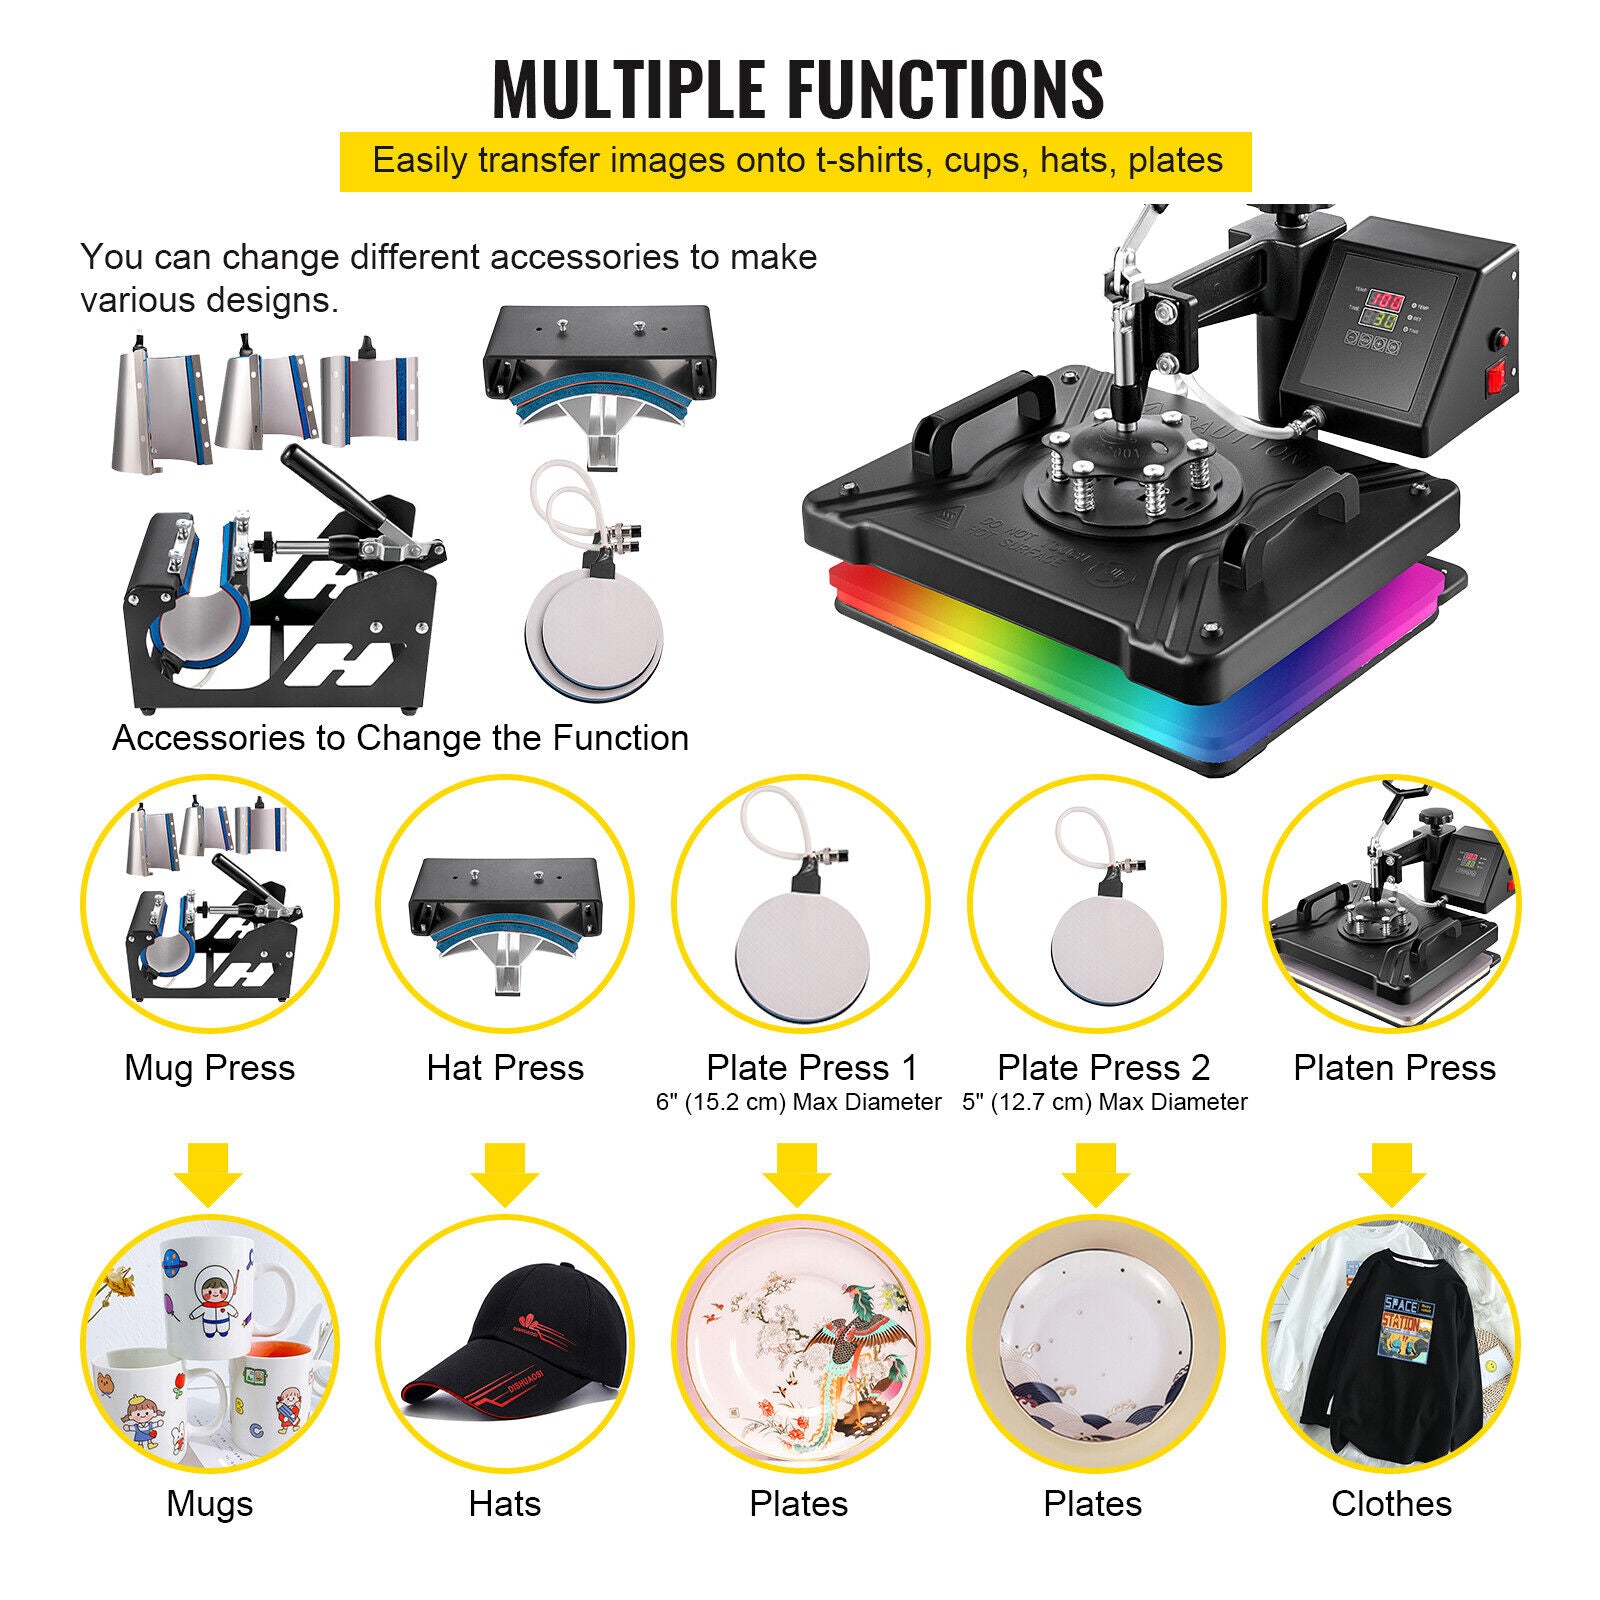 craftercuts 8 in 1 12 x 15 inch / United States VEVOR Combo Heat Press Machine 5/6/8 in 1 30*38CM 38*38CM Muntifunctional Sublimation Printer Transfer for Mug Hat Plate T-Shirt